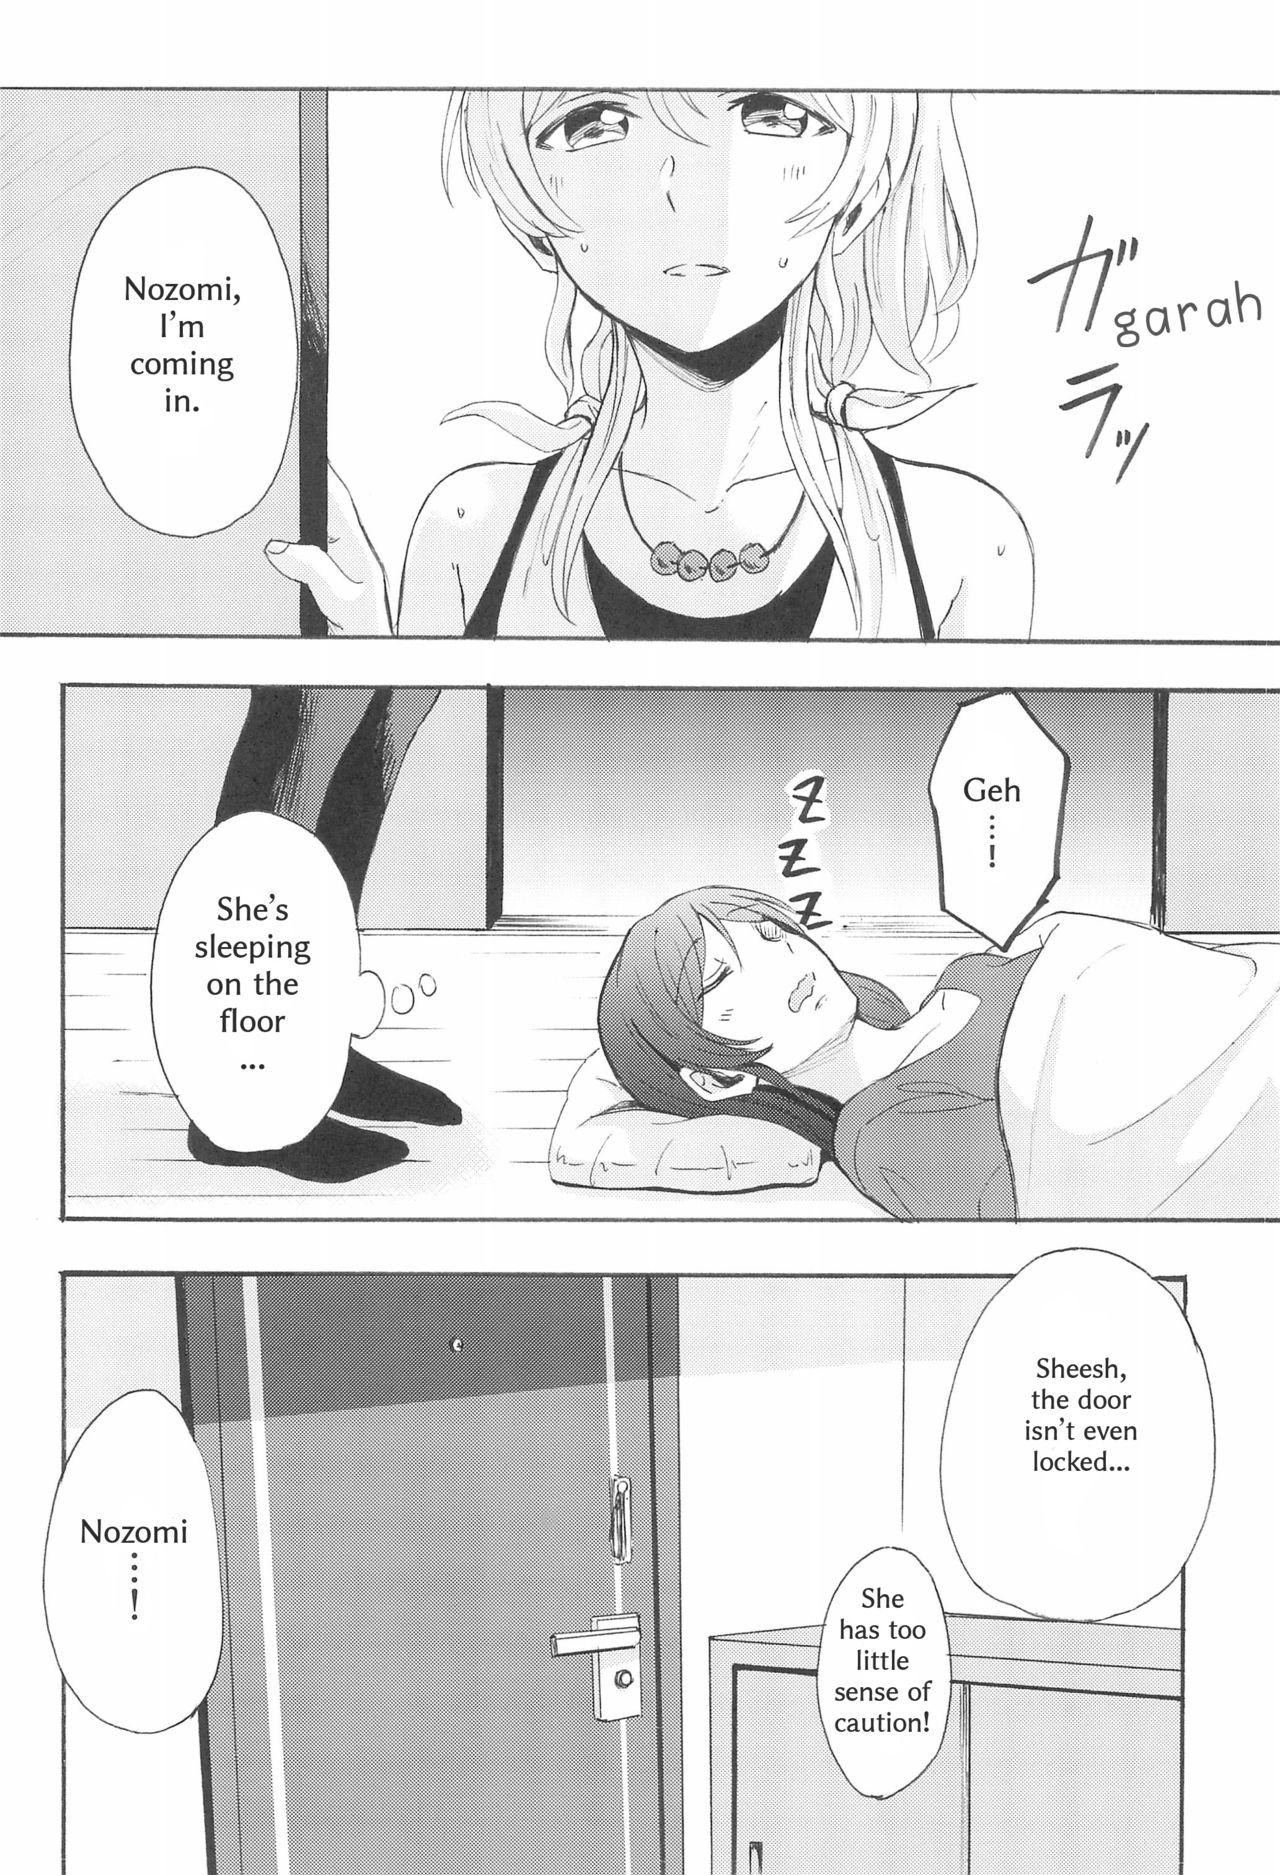 Gay Pov LONELINESS - Love live Chinese - Page 7